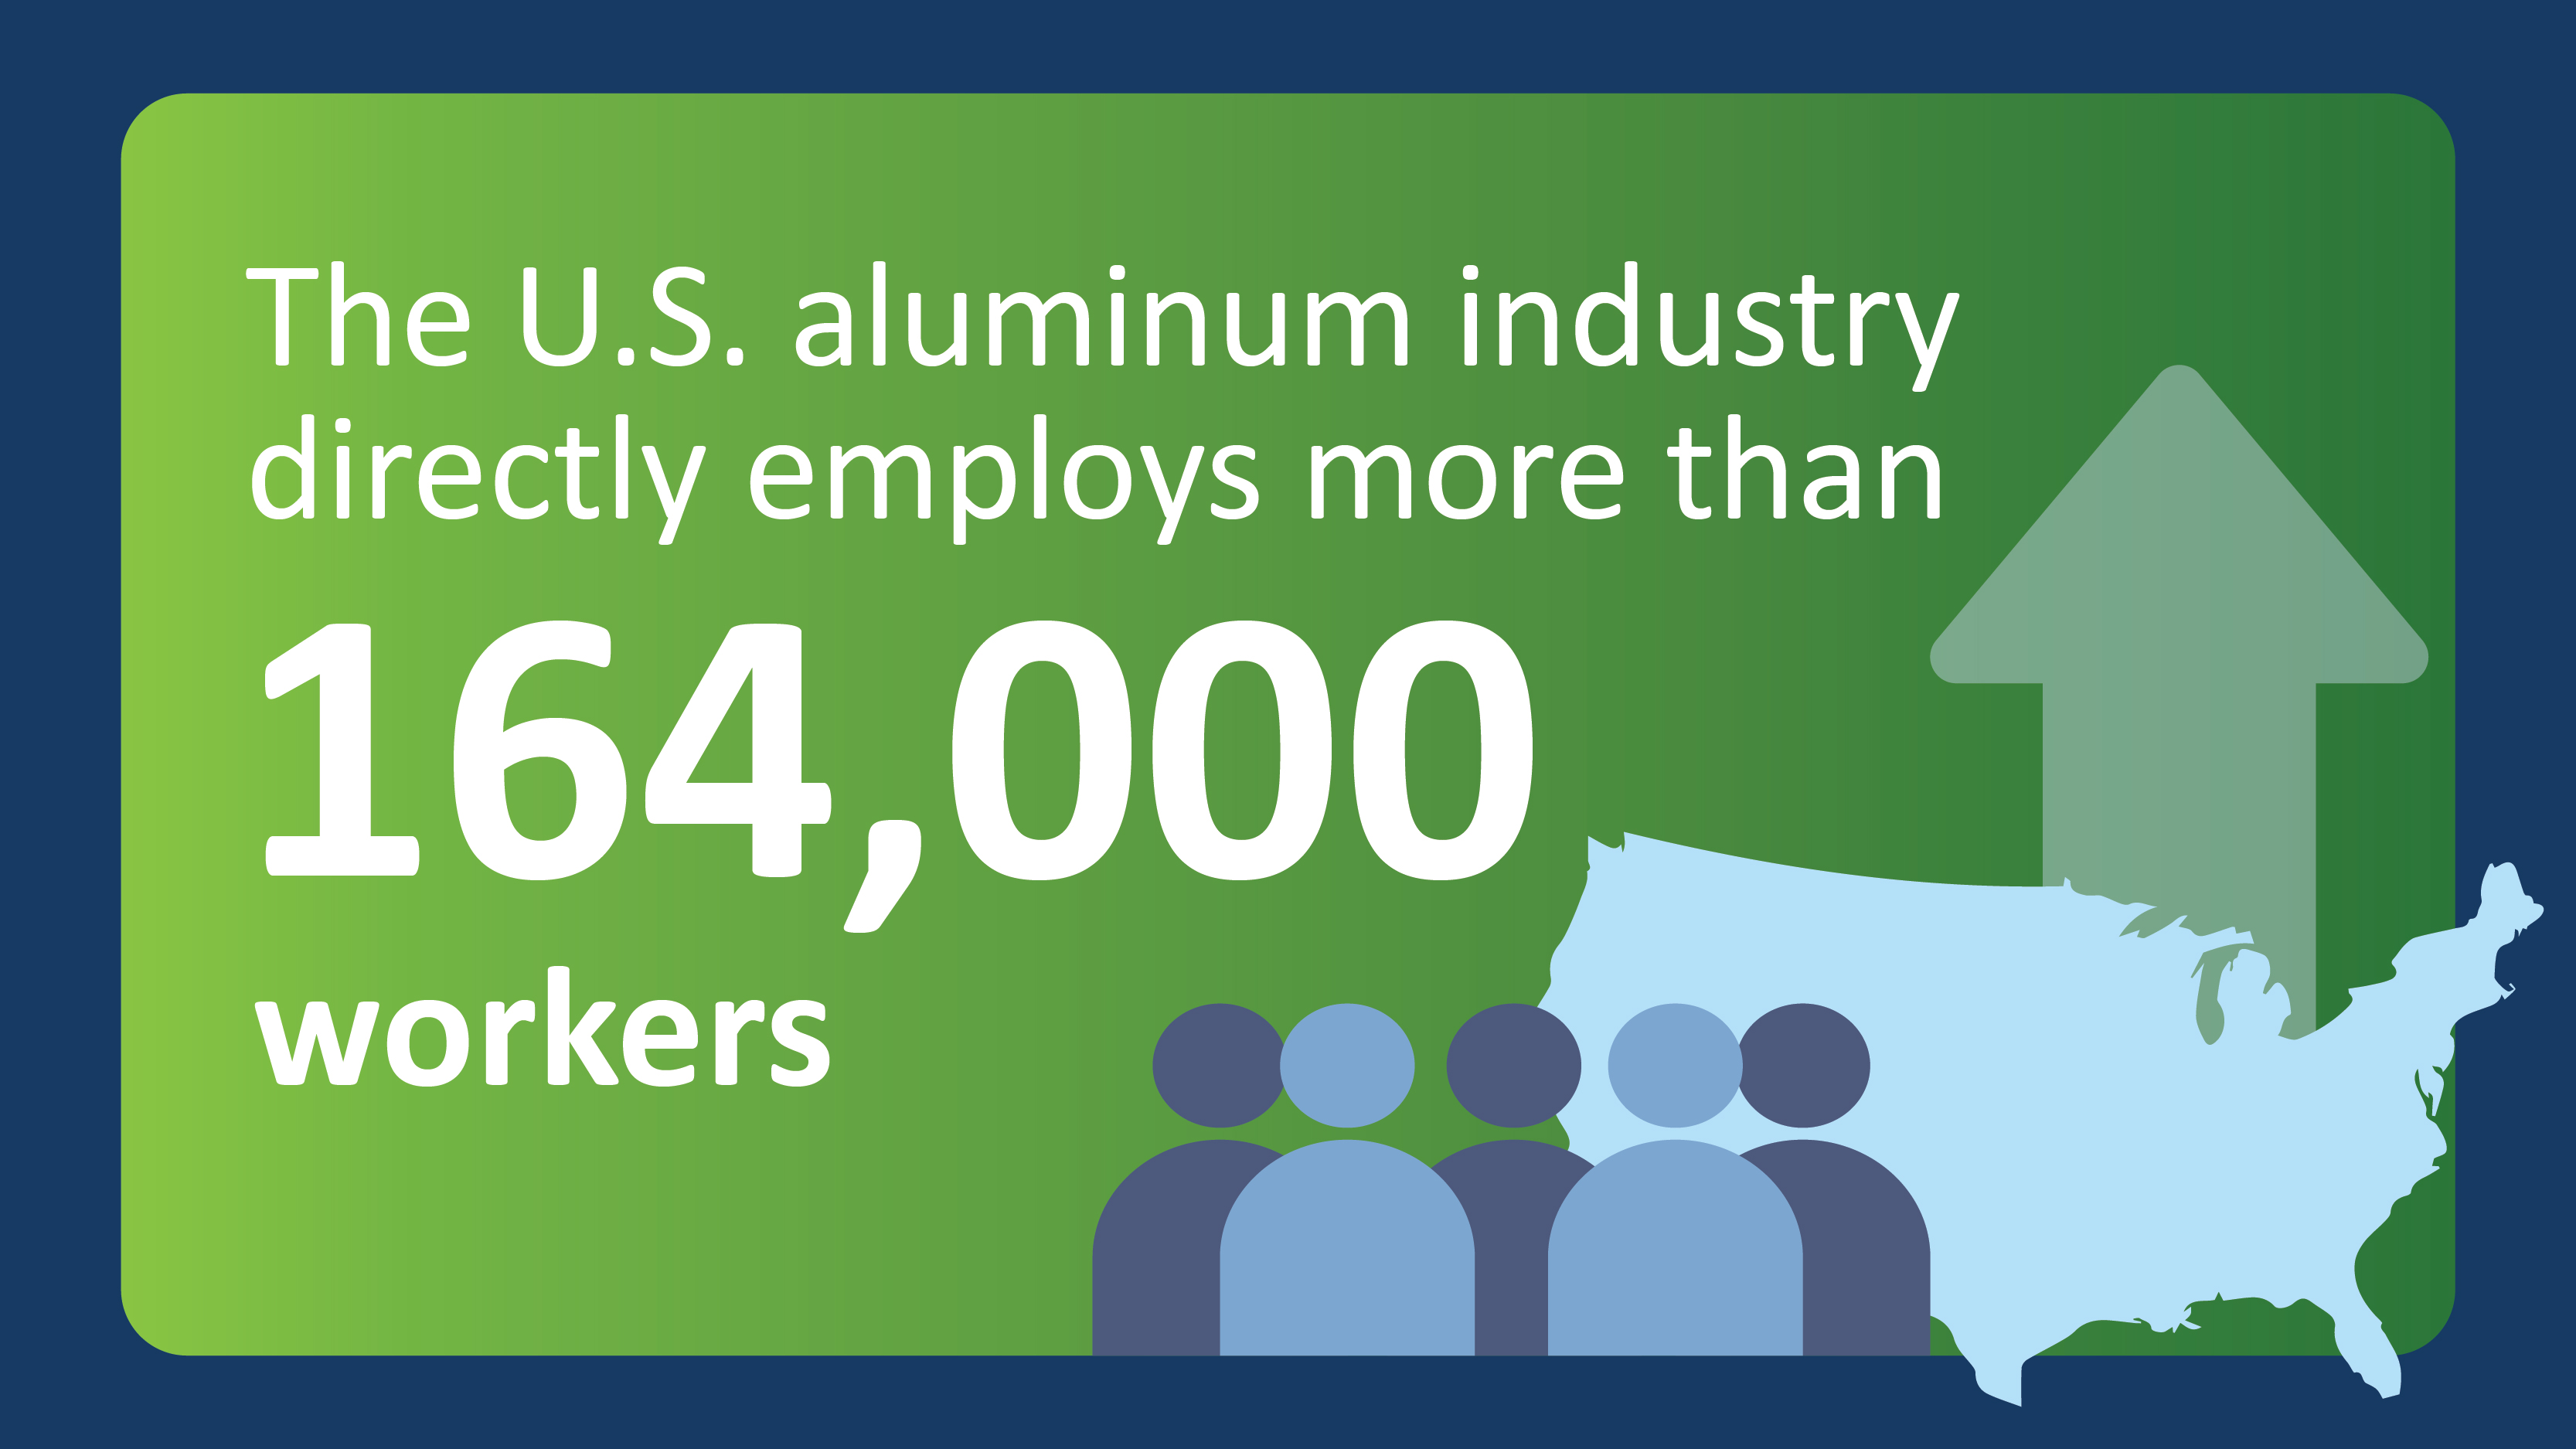 the U.S. aluminum industry directly employs more than 164,000 workers